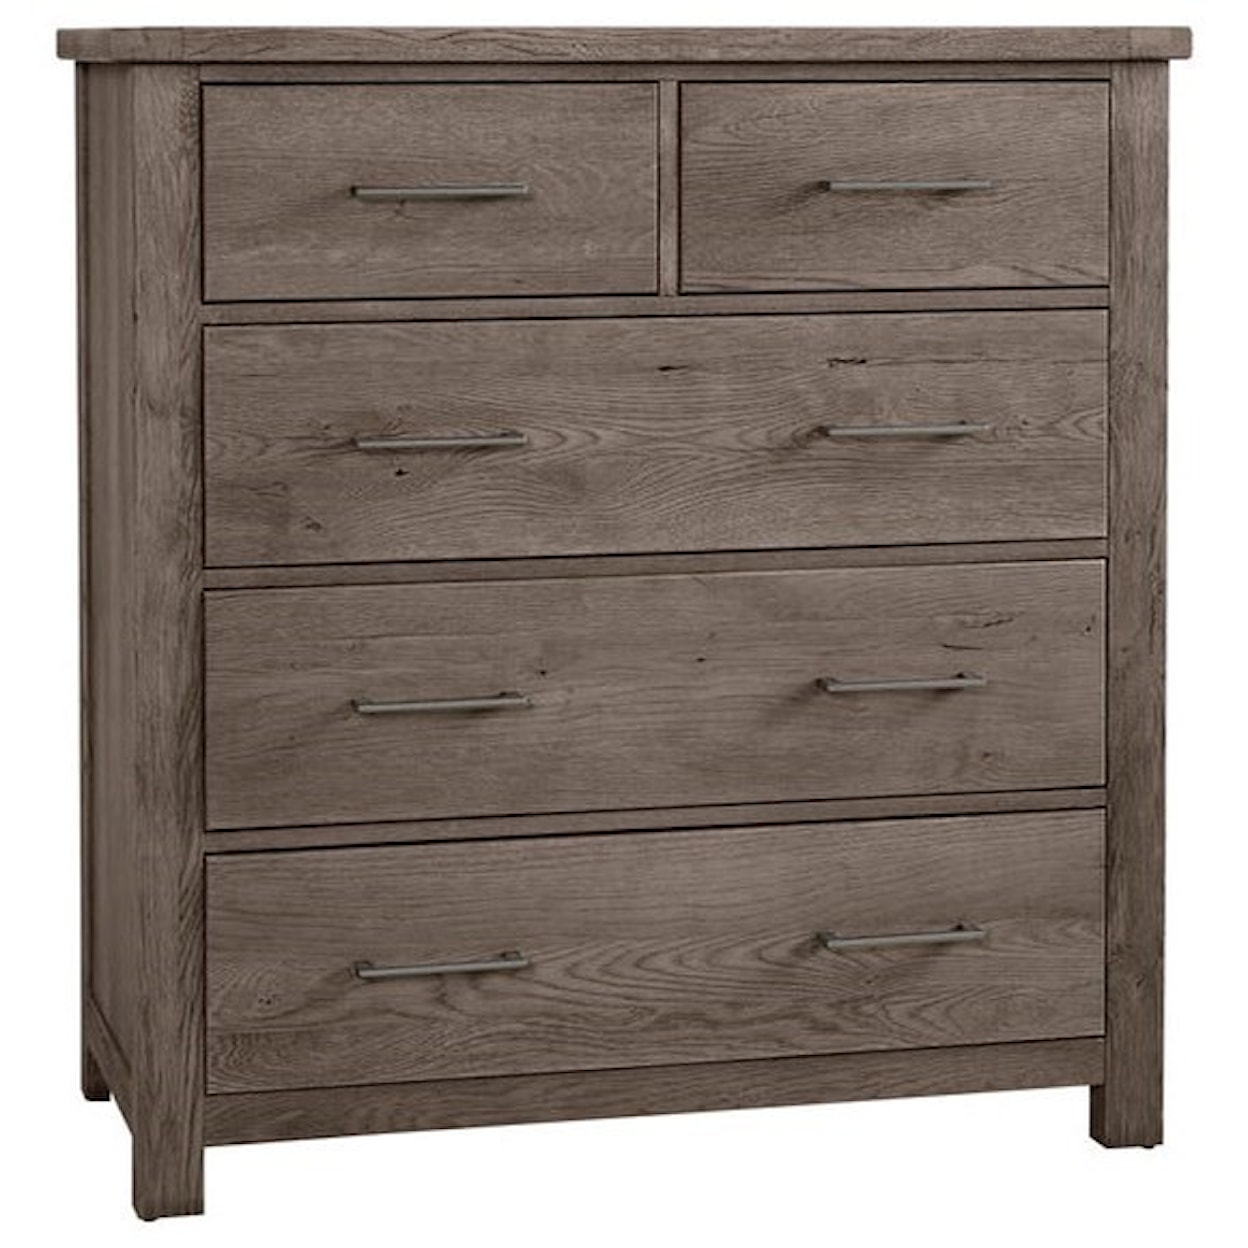 Carolina Bedroom Dovetail Bedroom Chest of Drawers